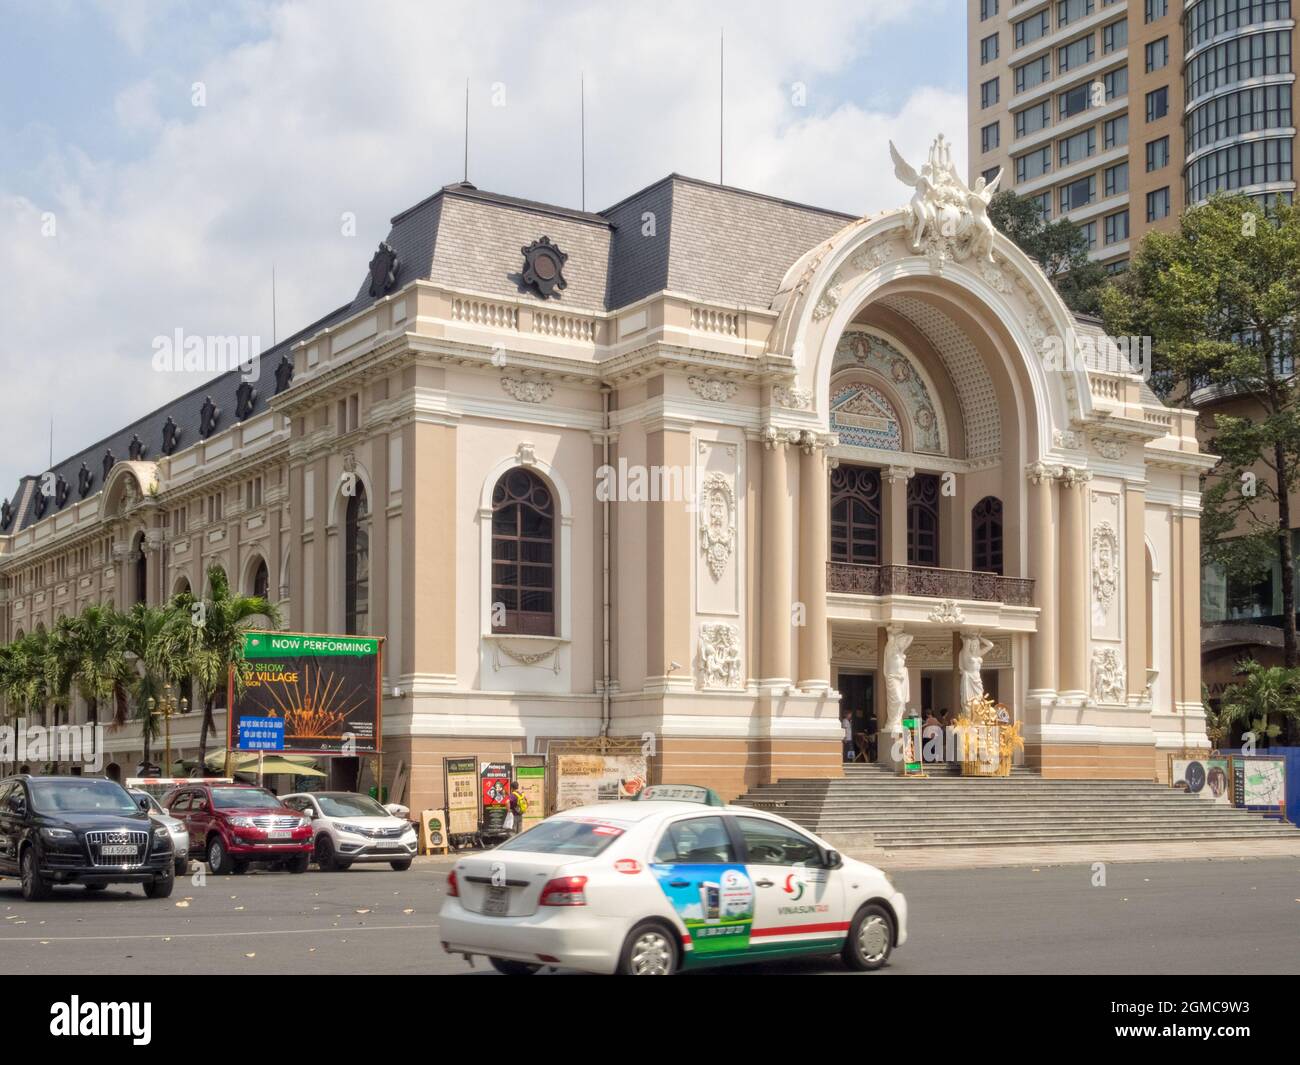 The Municipal Opera House, also known as Municipal Theatre, is a prime example of French Colonial architecture - Ho Chi Minh City, Vietnam Stock Photo